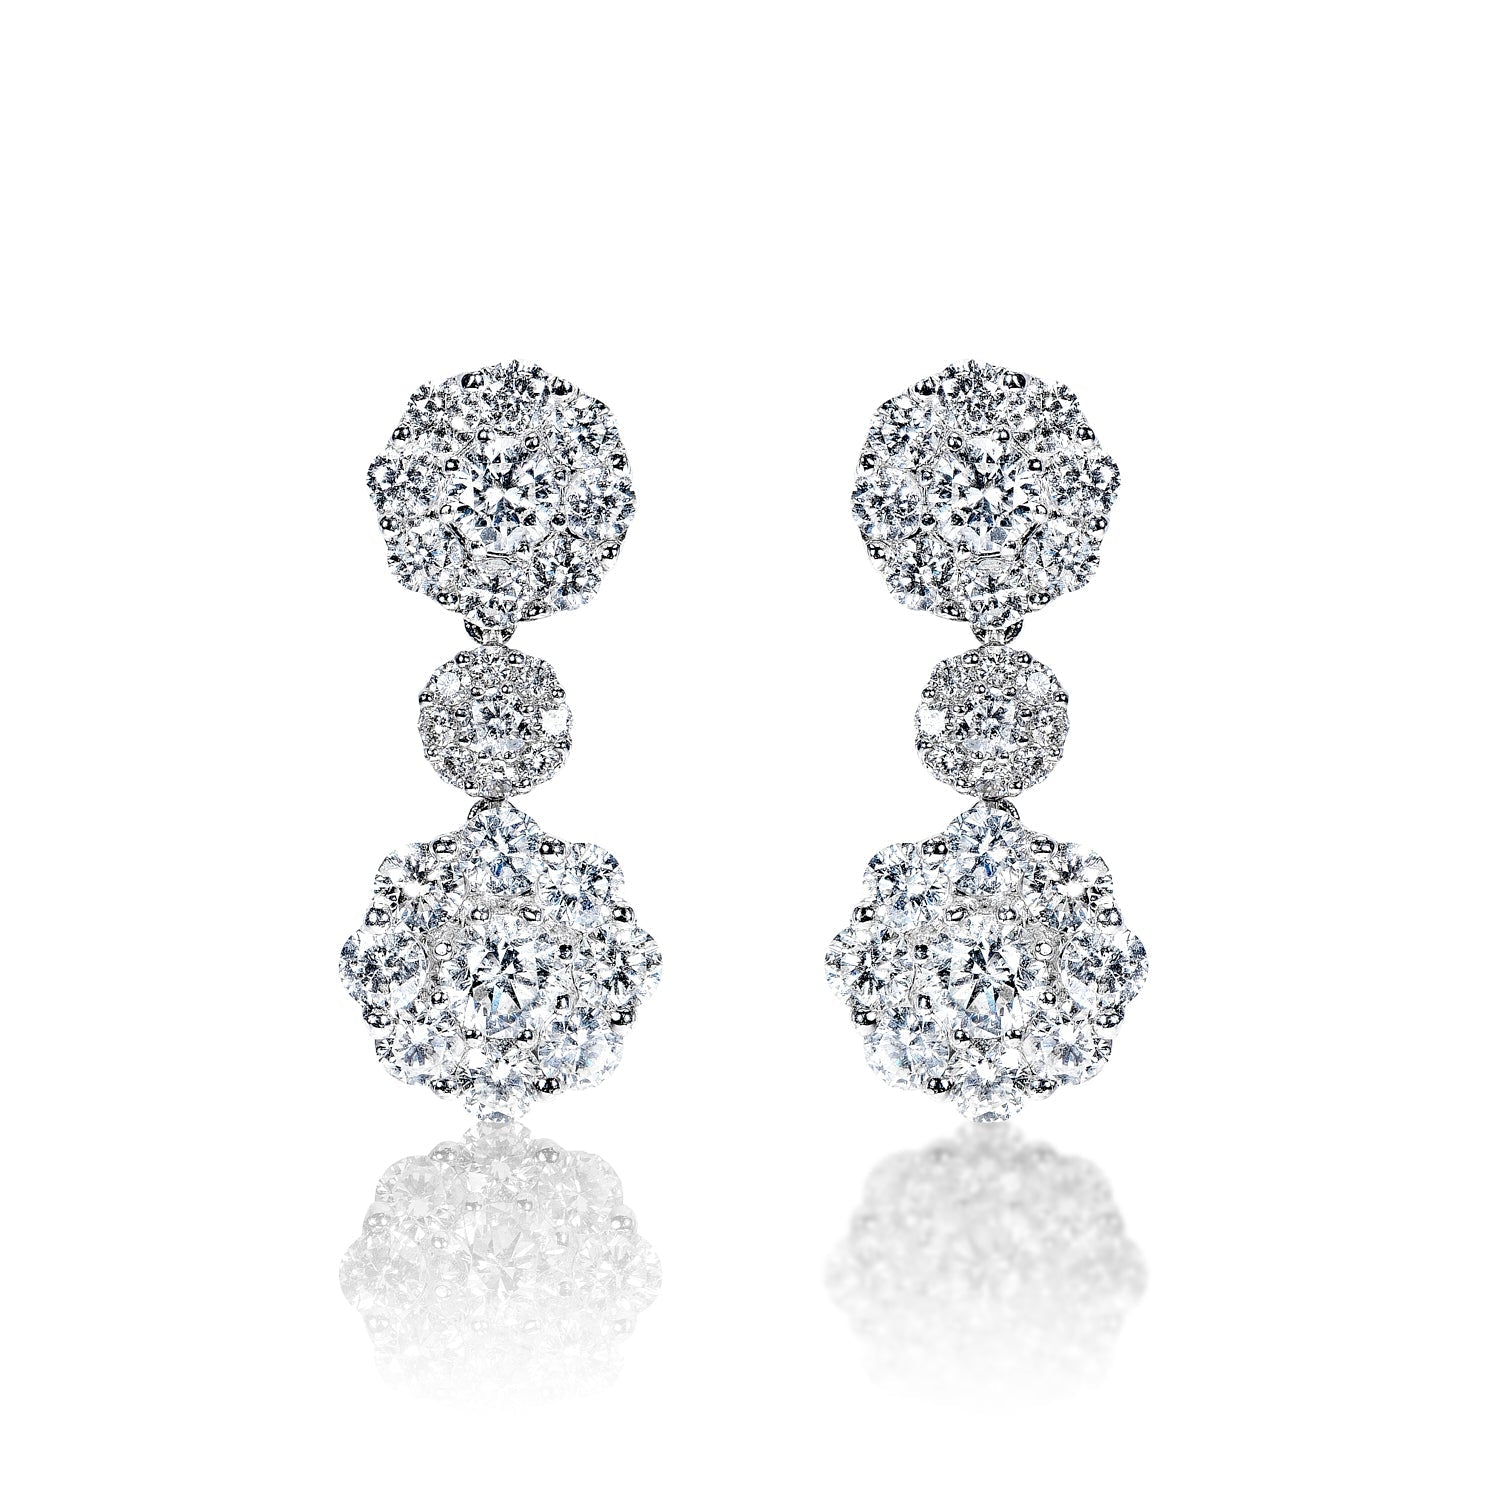 Maliyah 4 Carat Round Brilliant Diamond Drop Earrings in 18k White Gold Front View